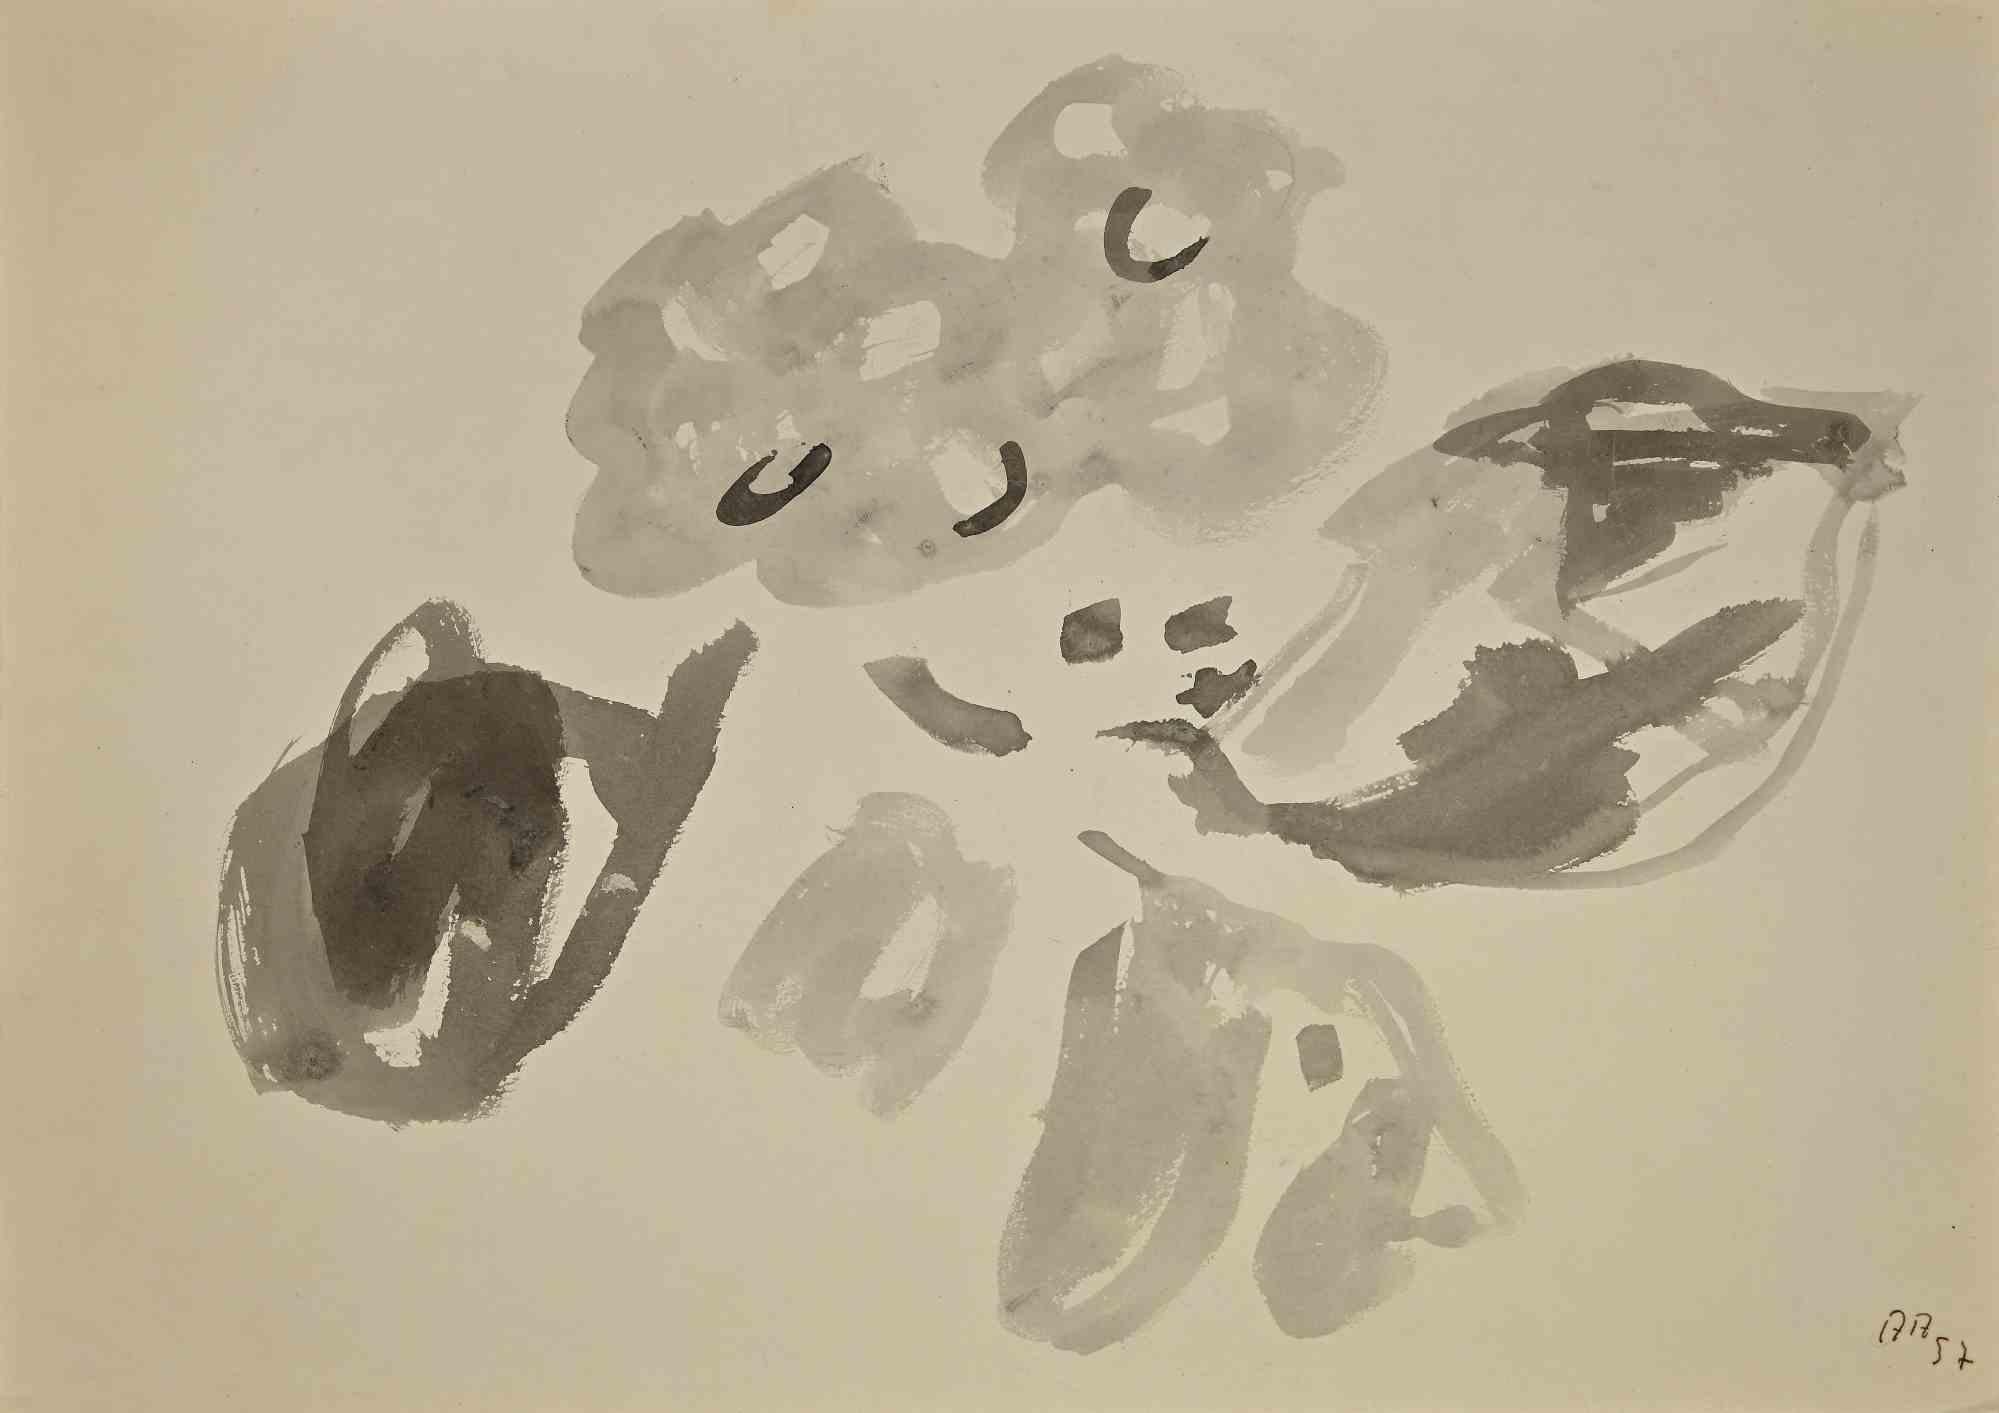 Abstract Composition - Watercolor on paper - 1957